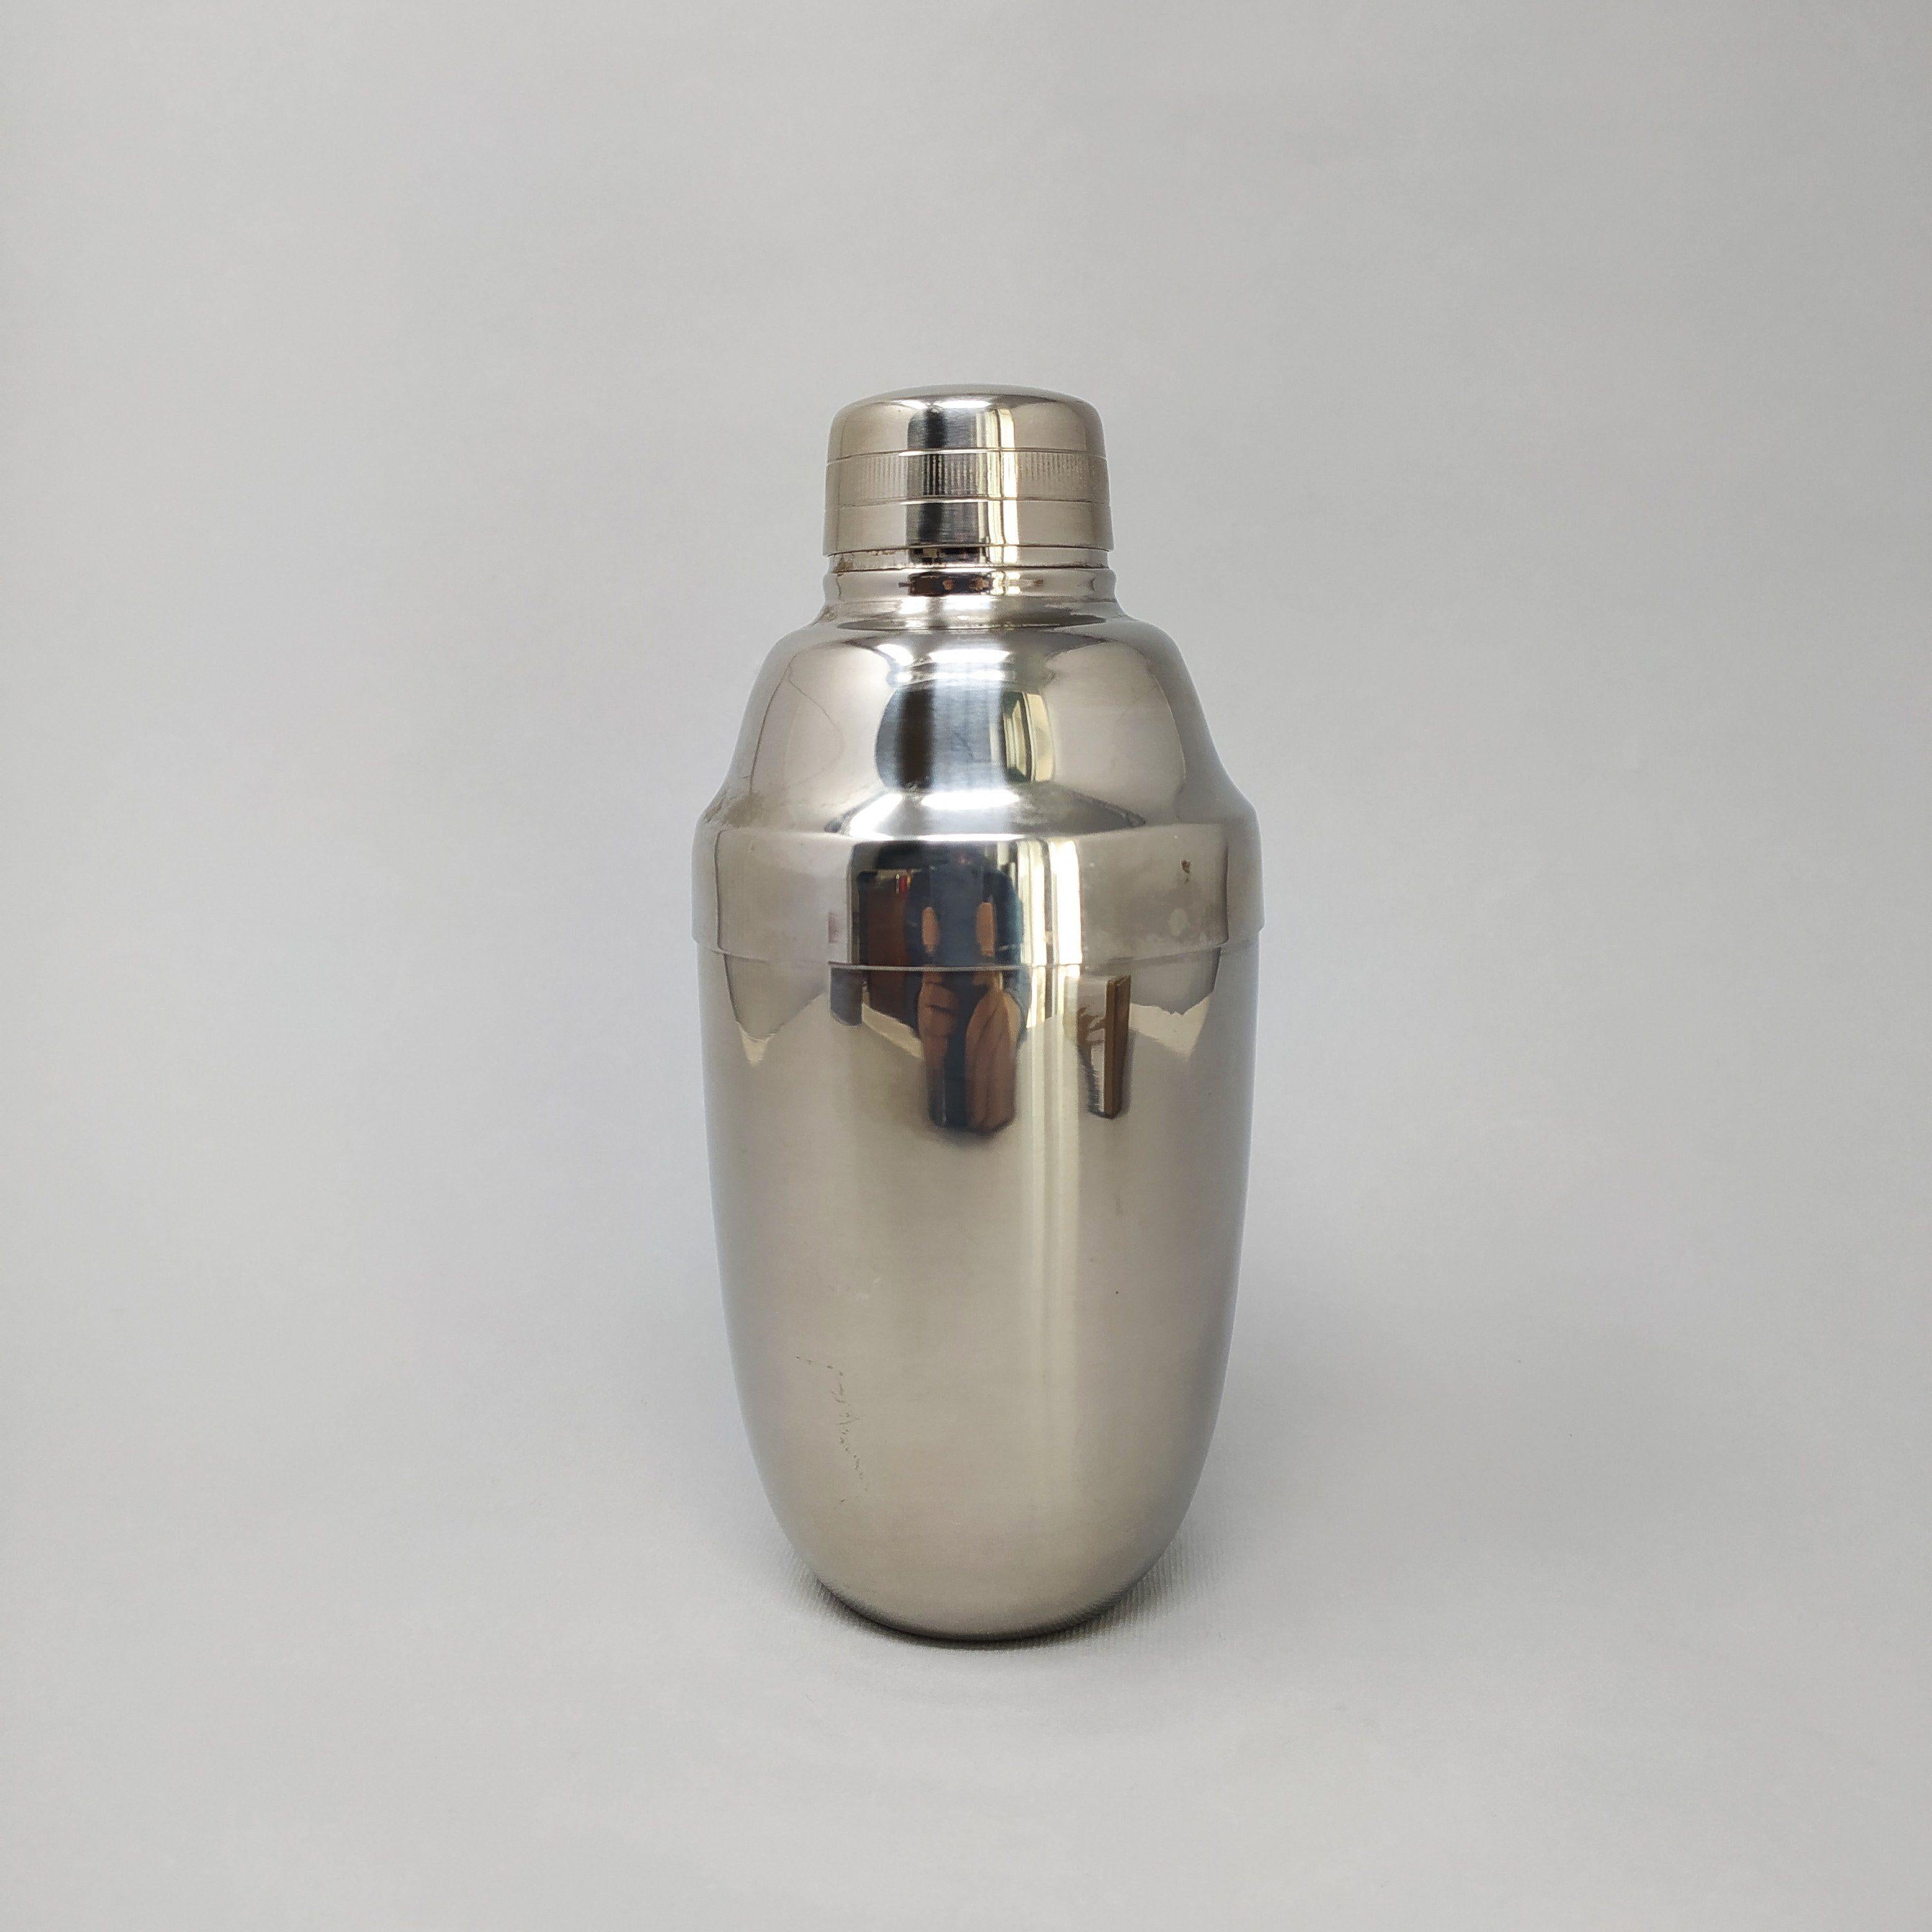 Amazing Italian cocktail shaker, in excellent condition. Made in Italy in stainless steel. 1950s
Dimensions: diam 3,14 x 7,08 H inches
Dimensions: diam cm 8 x cm 18 H.